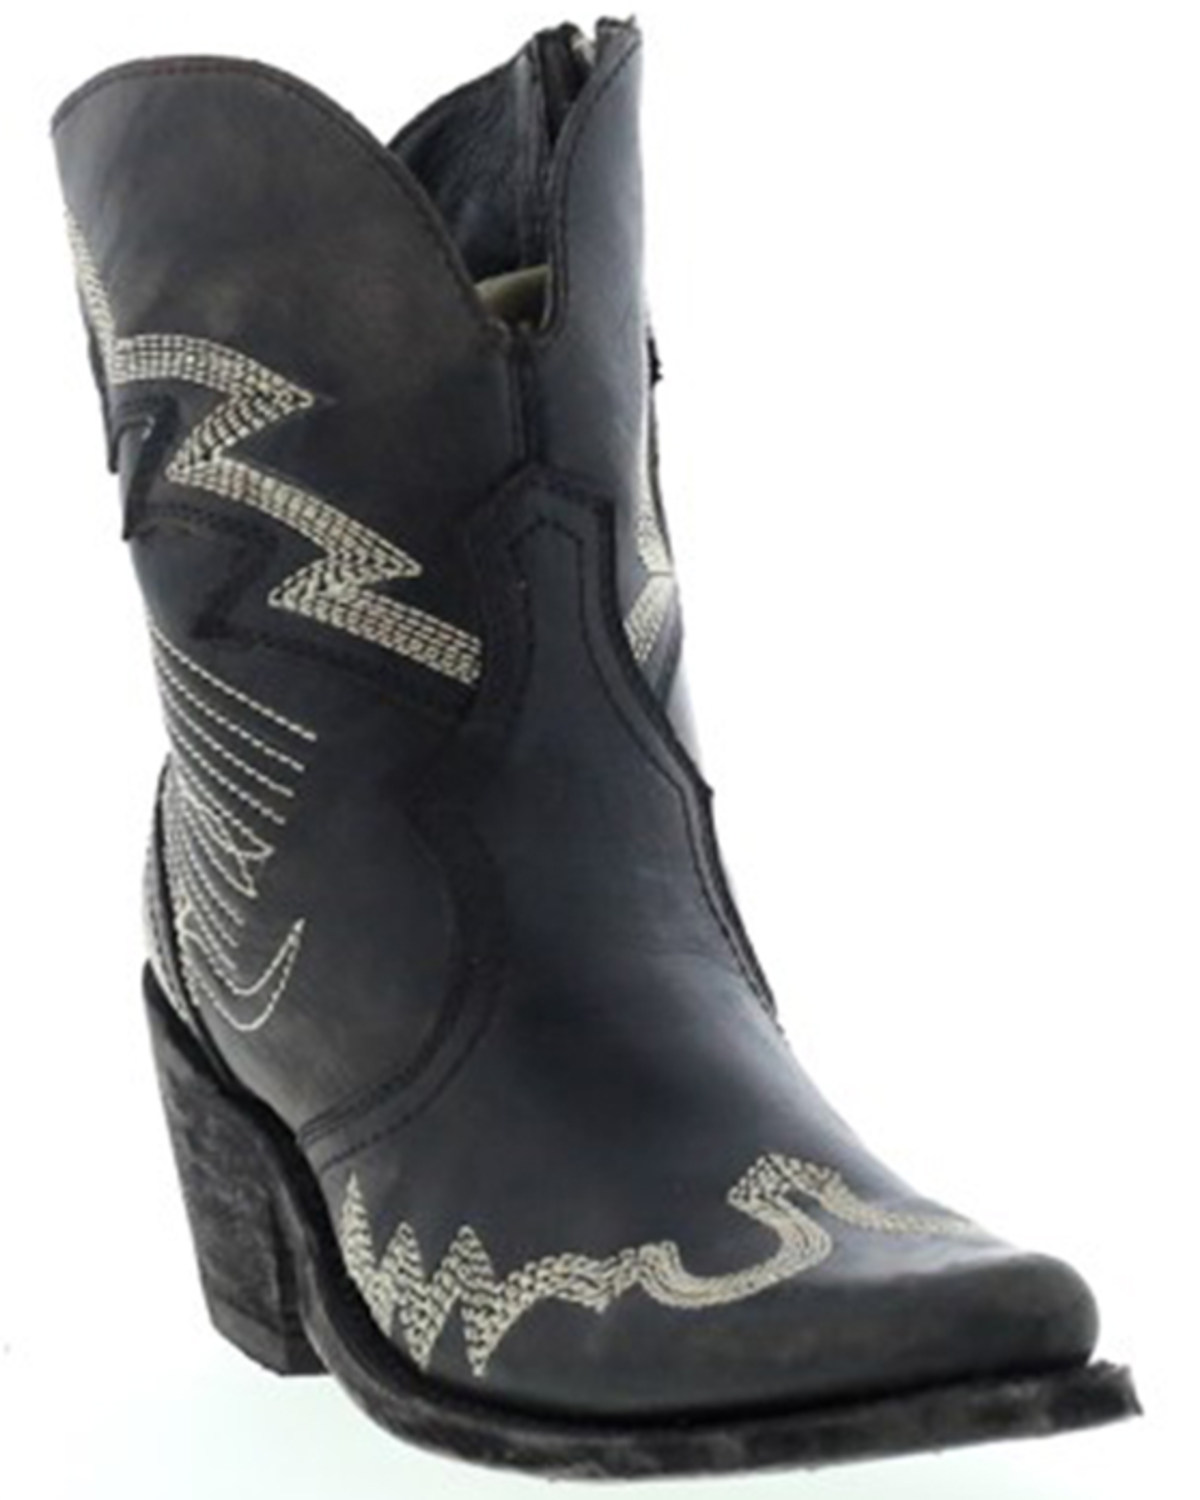 Liberty Black Women's Side Bug & Wrinkle Mosel Short Western Boots - Pointed Toe